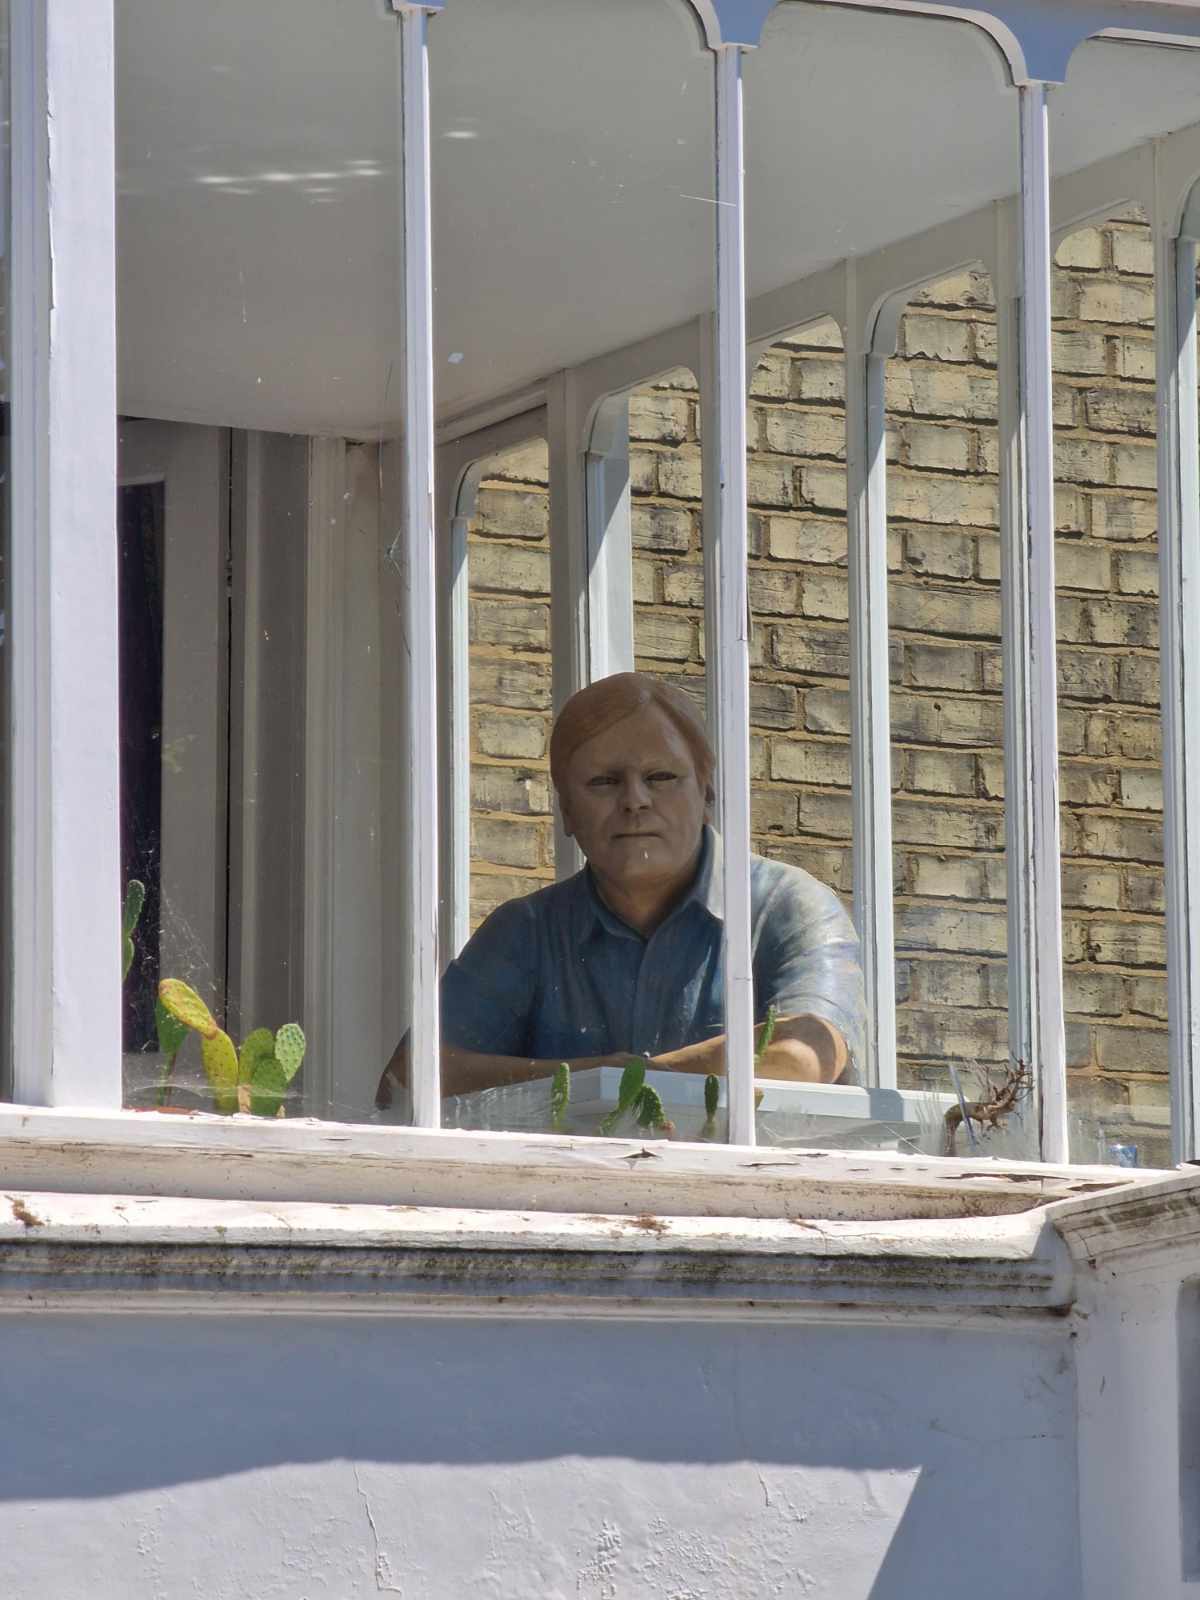 There's a house in my neighborhood with a super creepy wax man sat in a 1st floor sun room